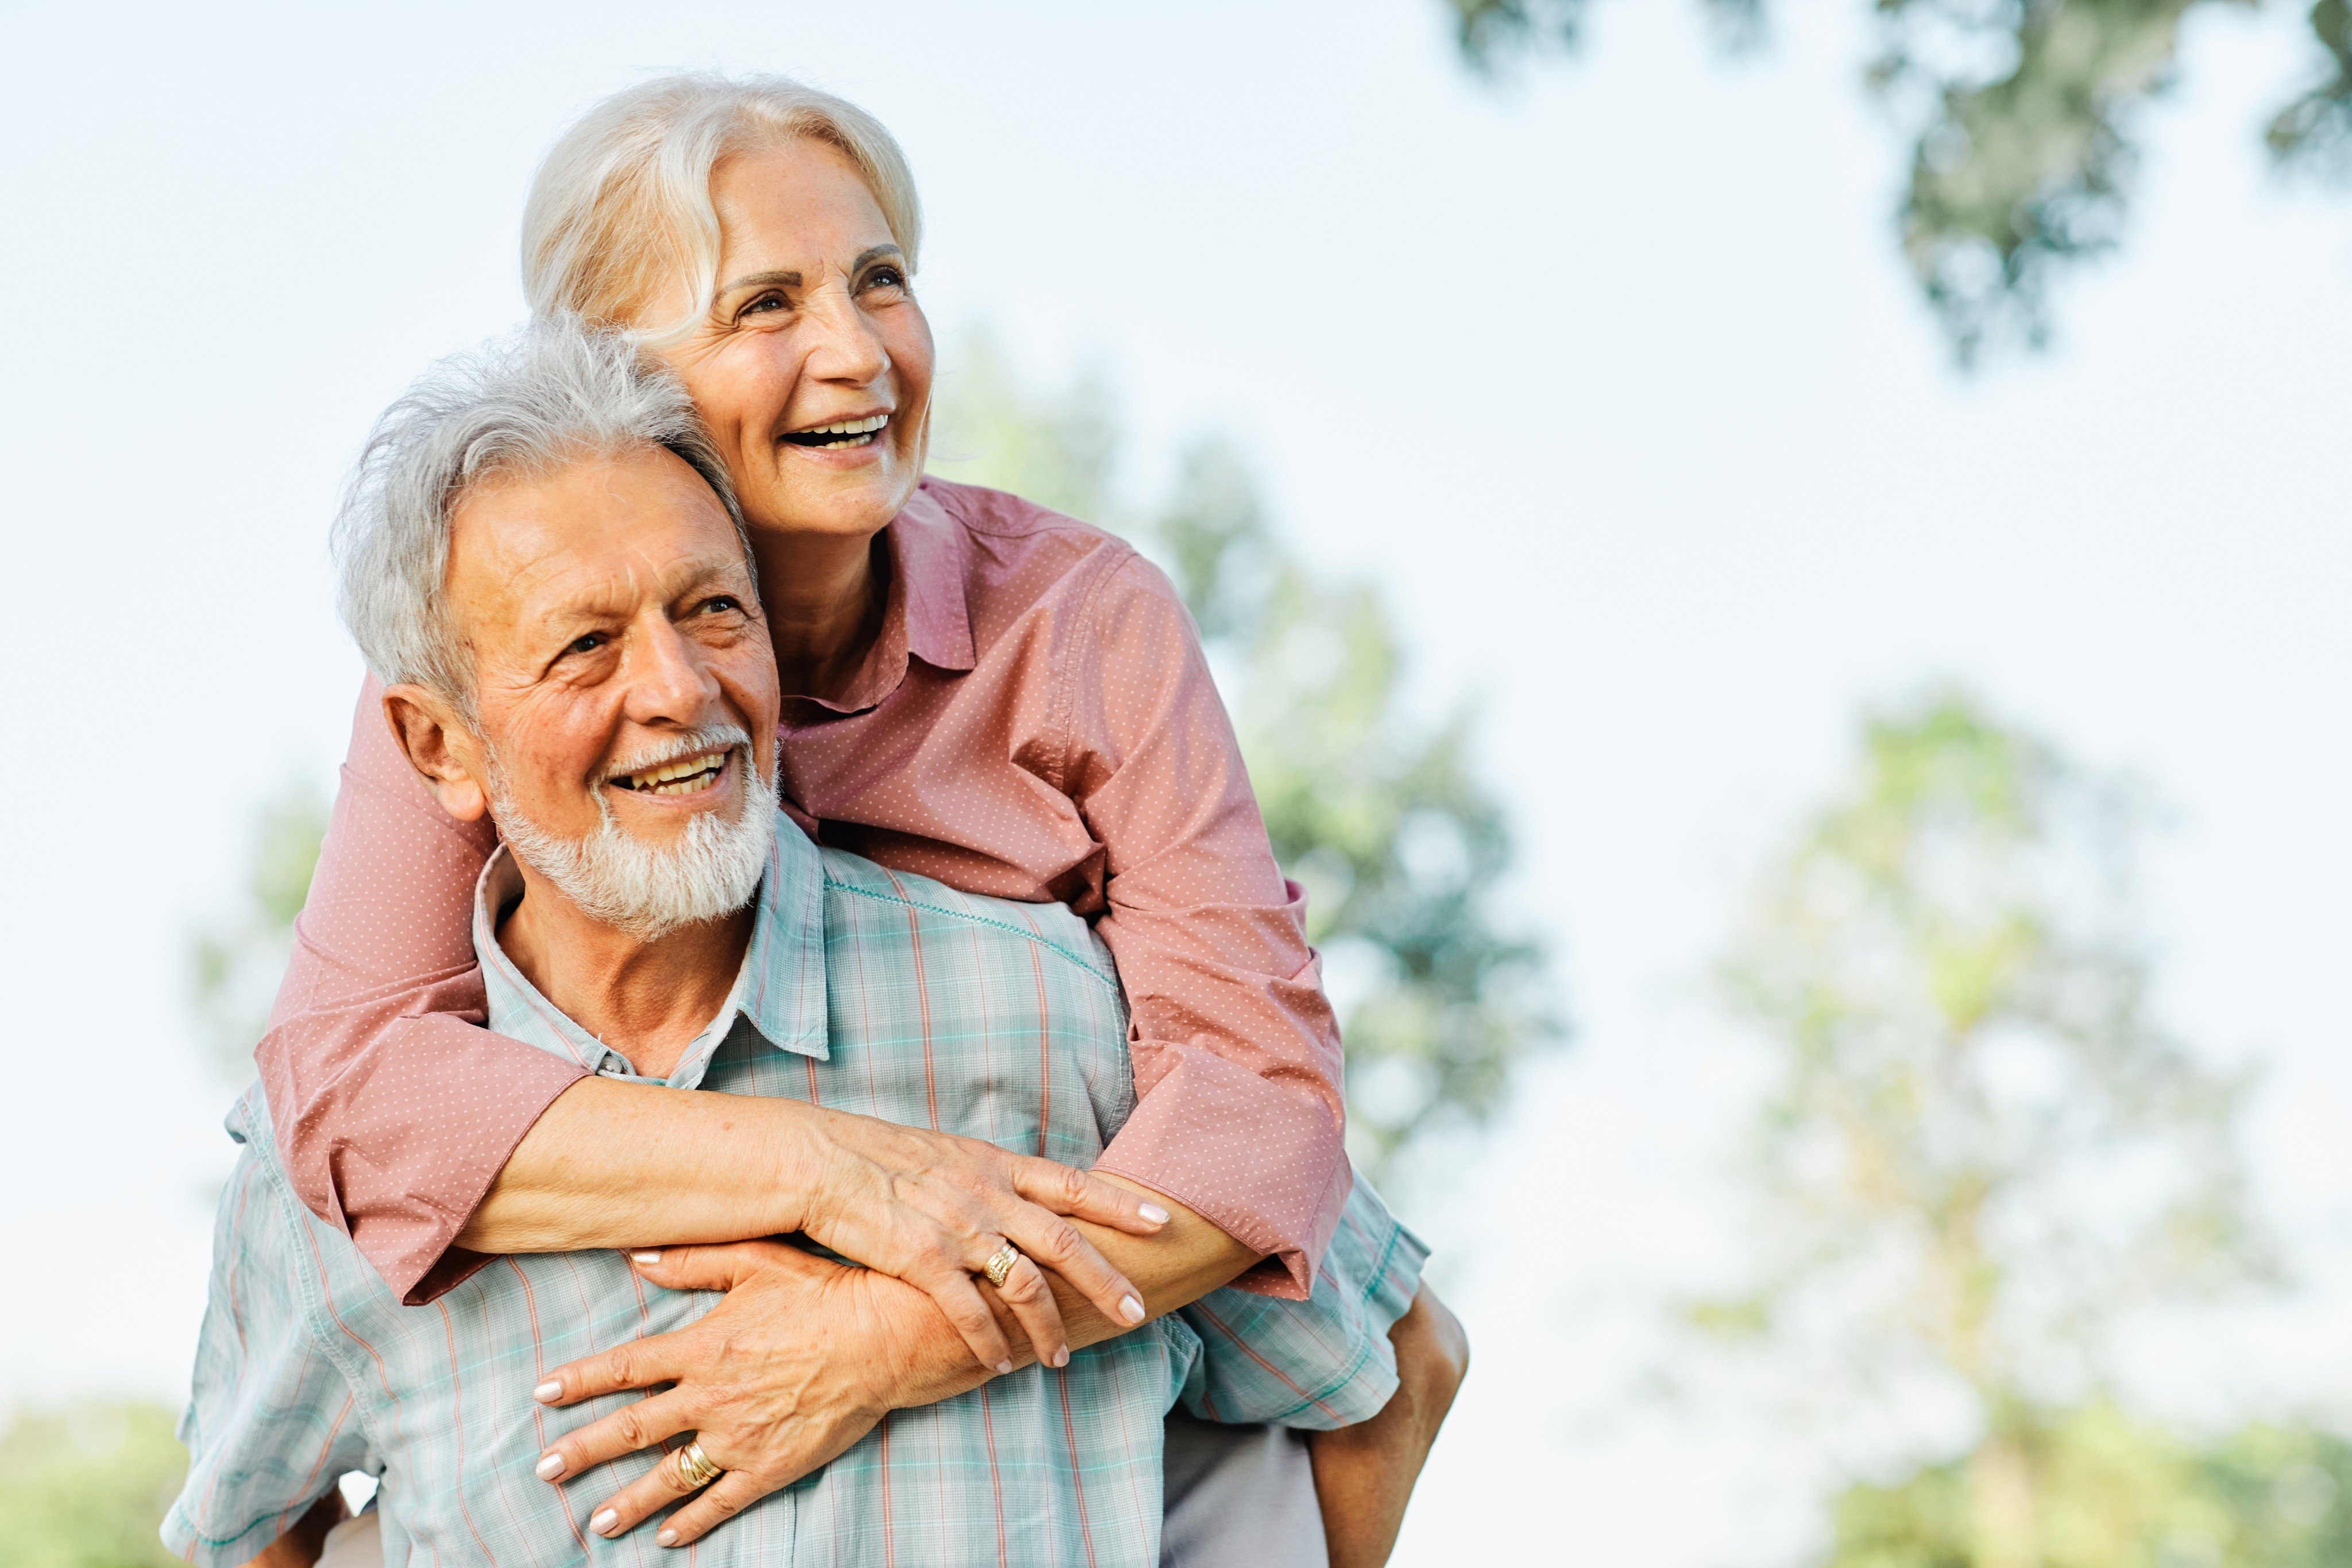 For those who wish to avoid a “grey divorce” - divorce among older adults - it is important to engage in activities that you both enjoy as it creates an opportunity for meaningful conversations and the chance to create new shared experiences. Photo: Shutterstock